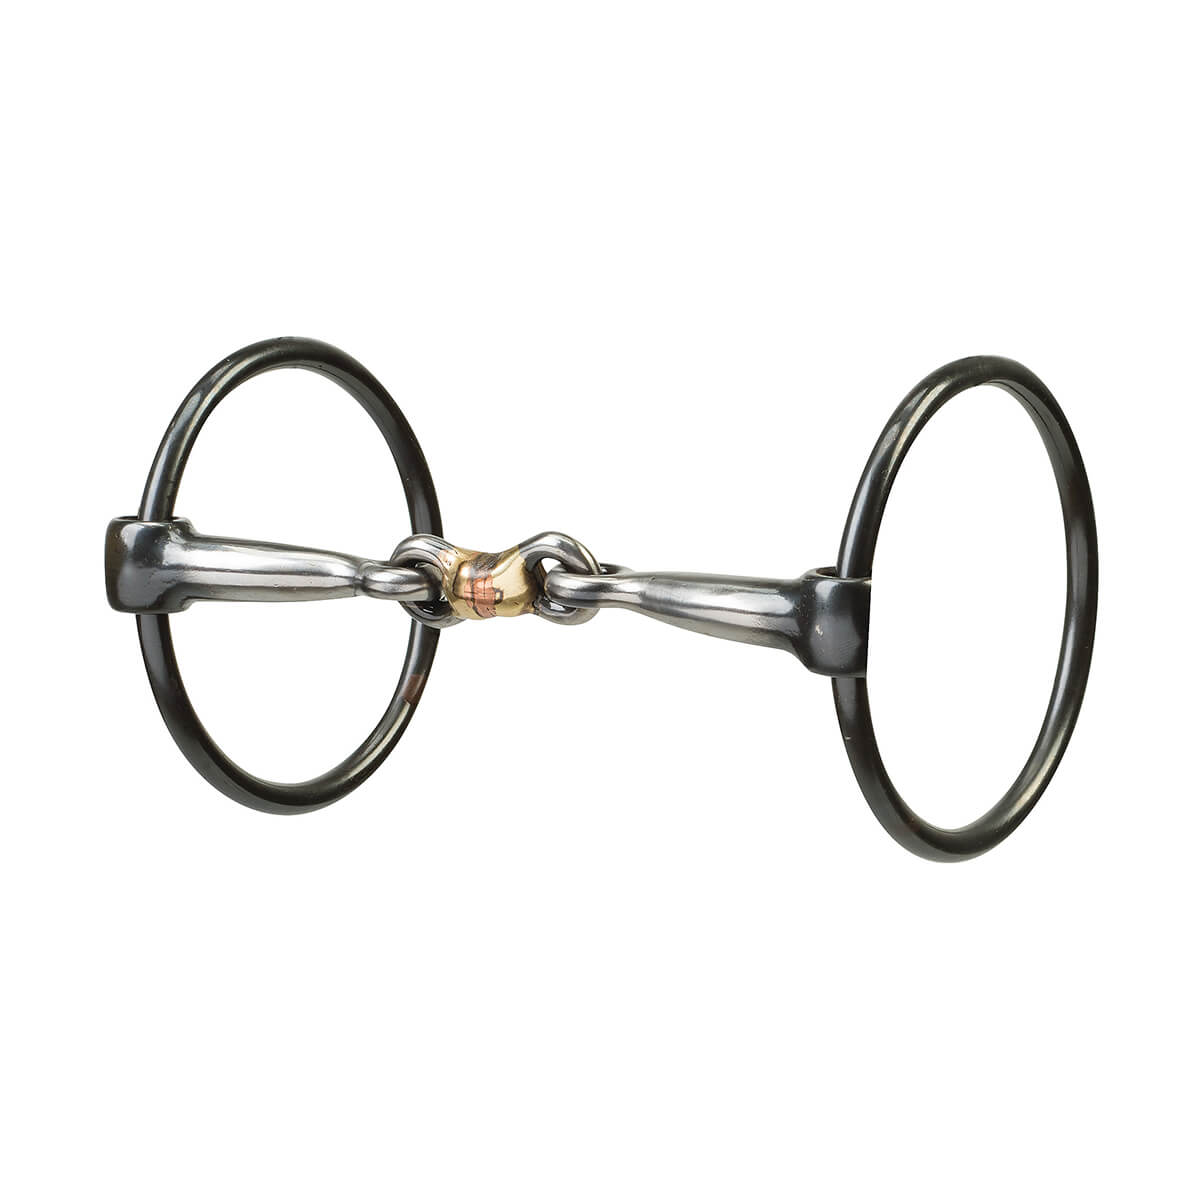 Ring Snaffle Bit with Sweet Iron Dogbone Mouth with Copper Inlay - Black - 5-in